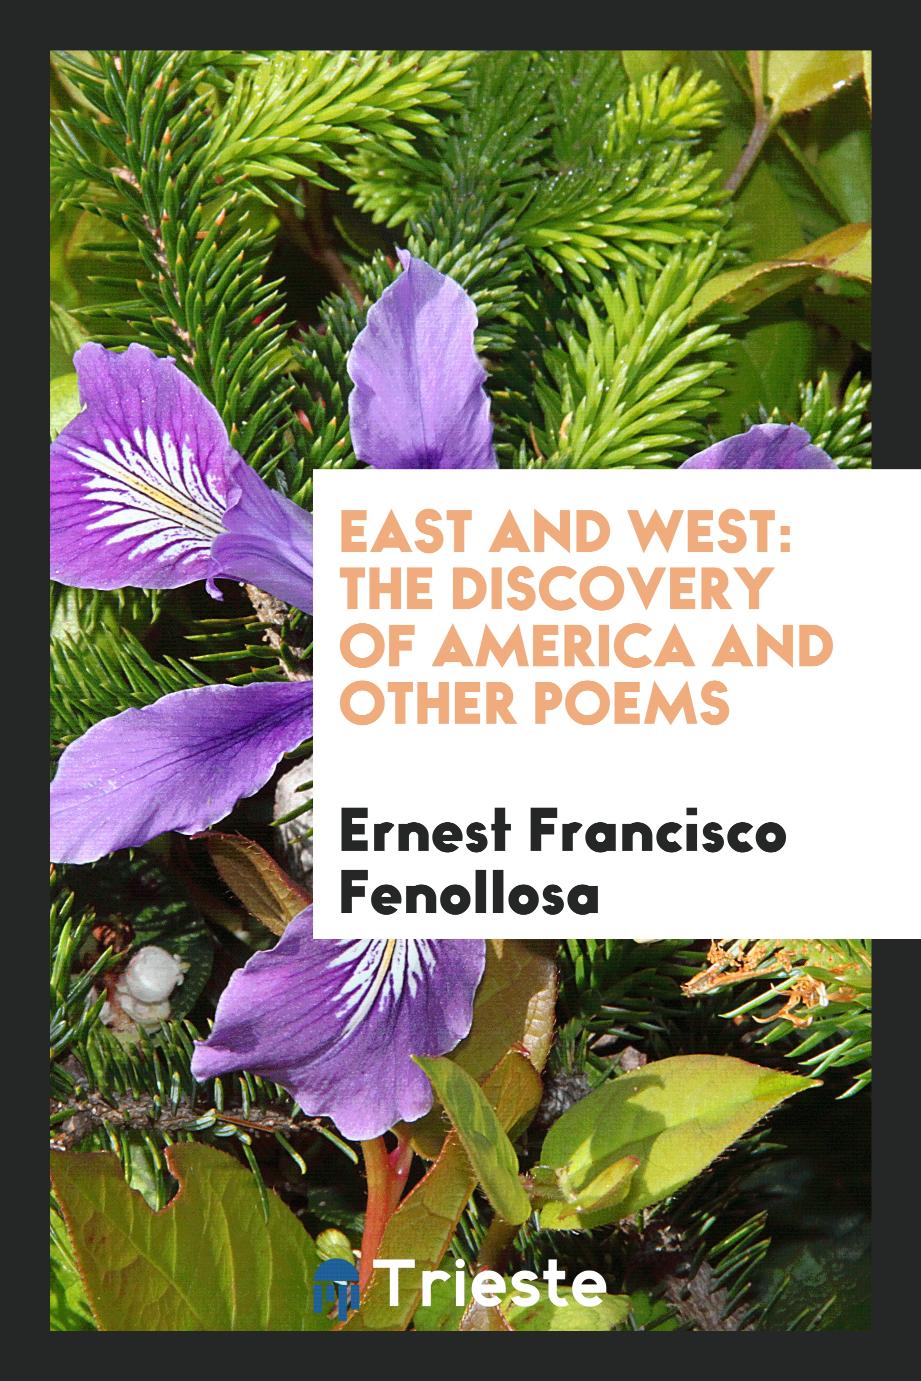 East and West: The Discovery of America and Other Poems